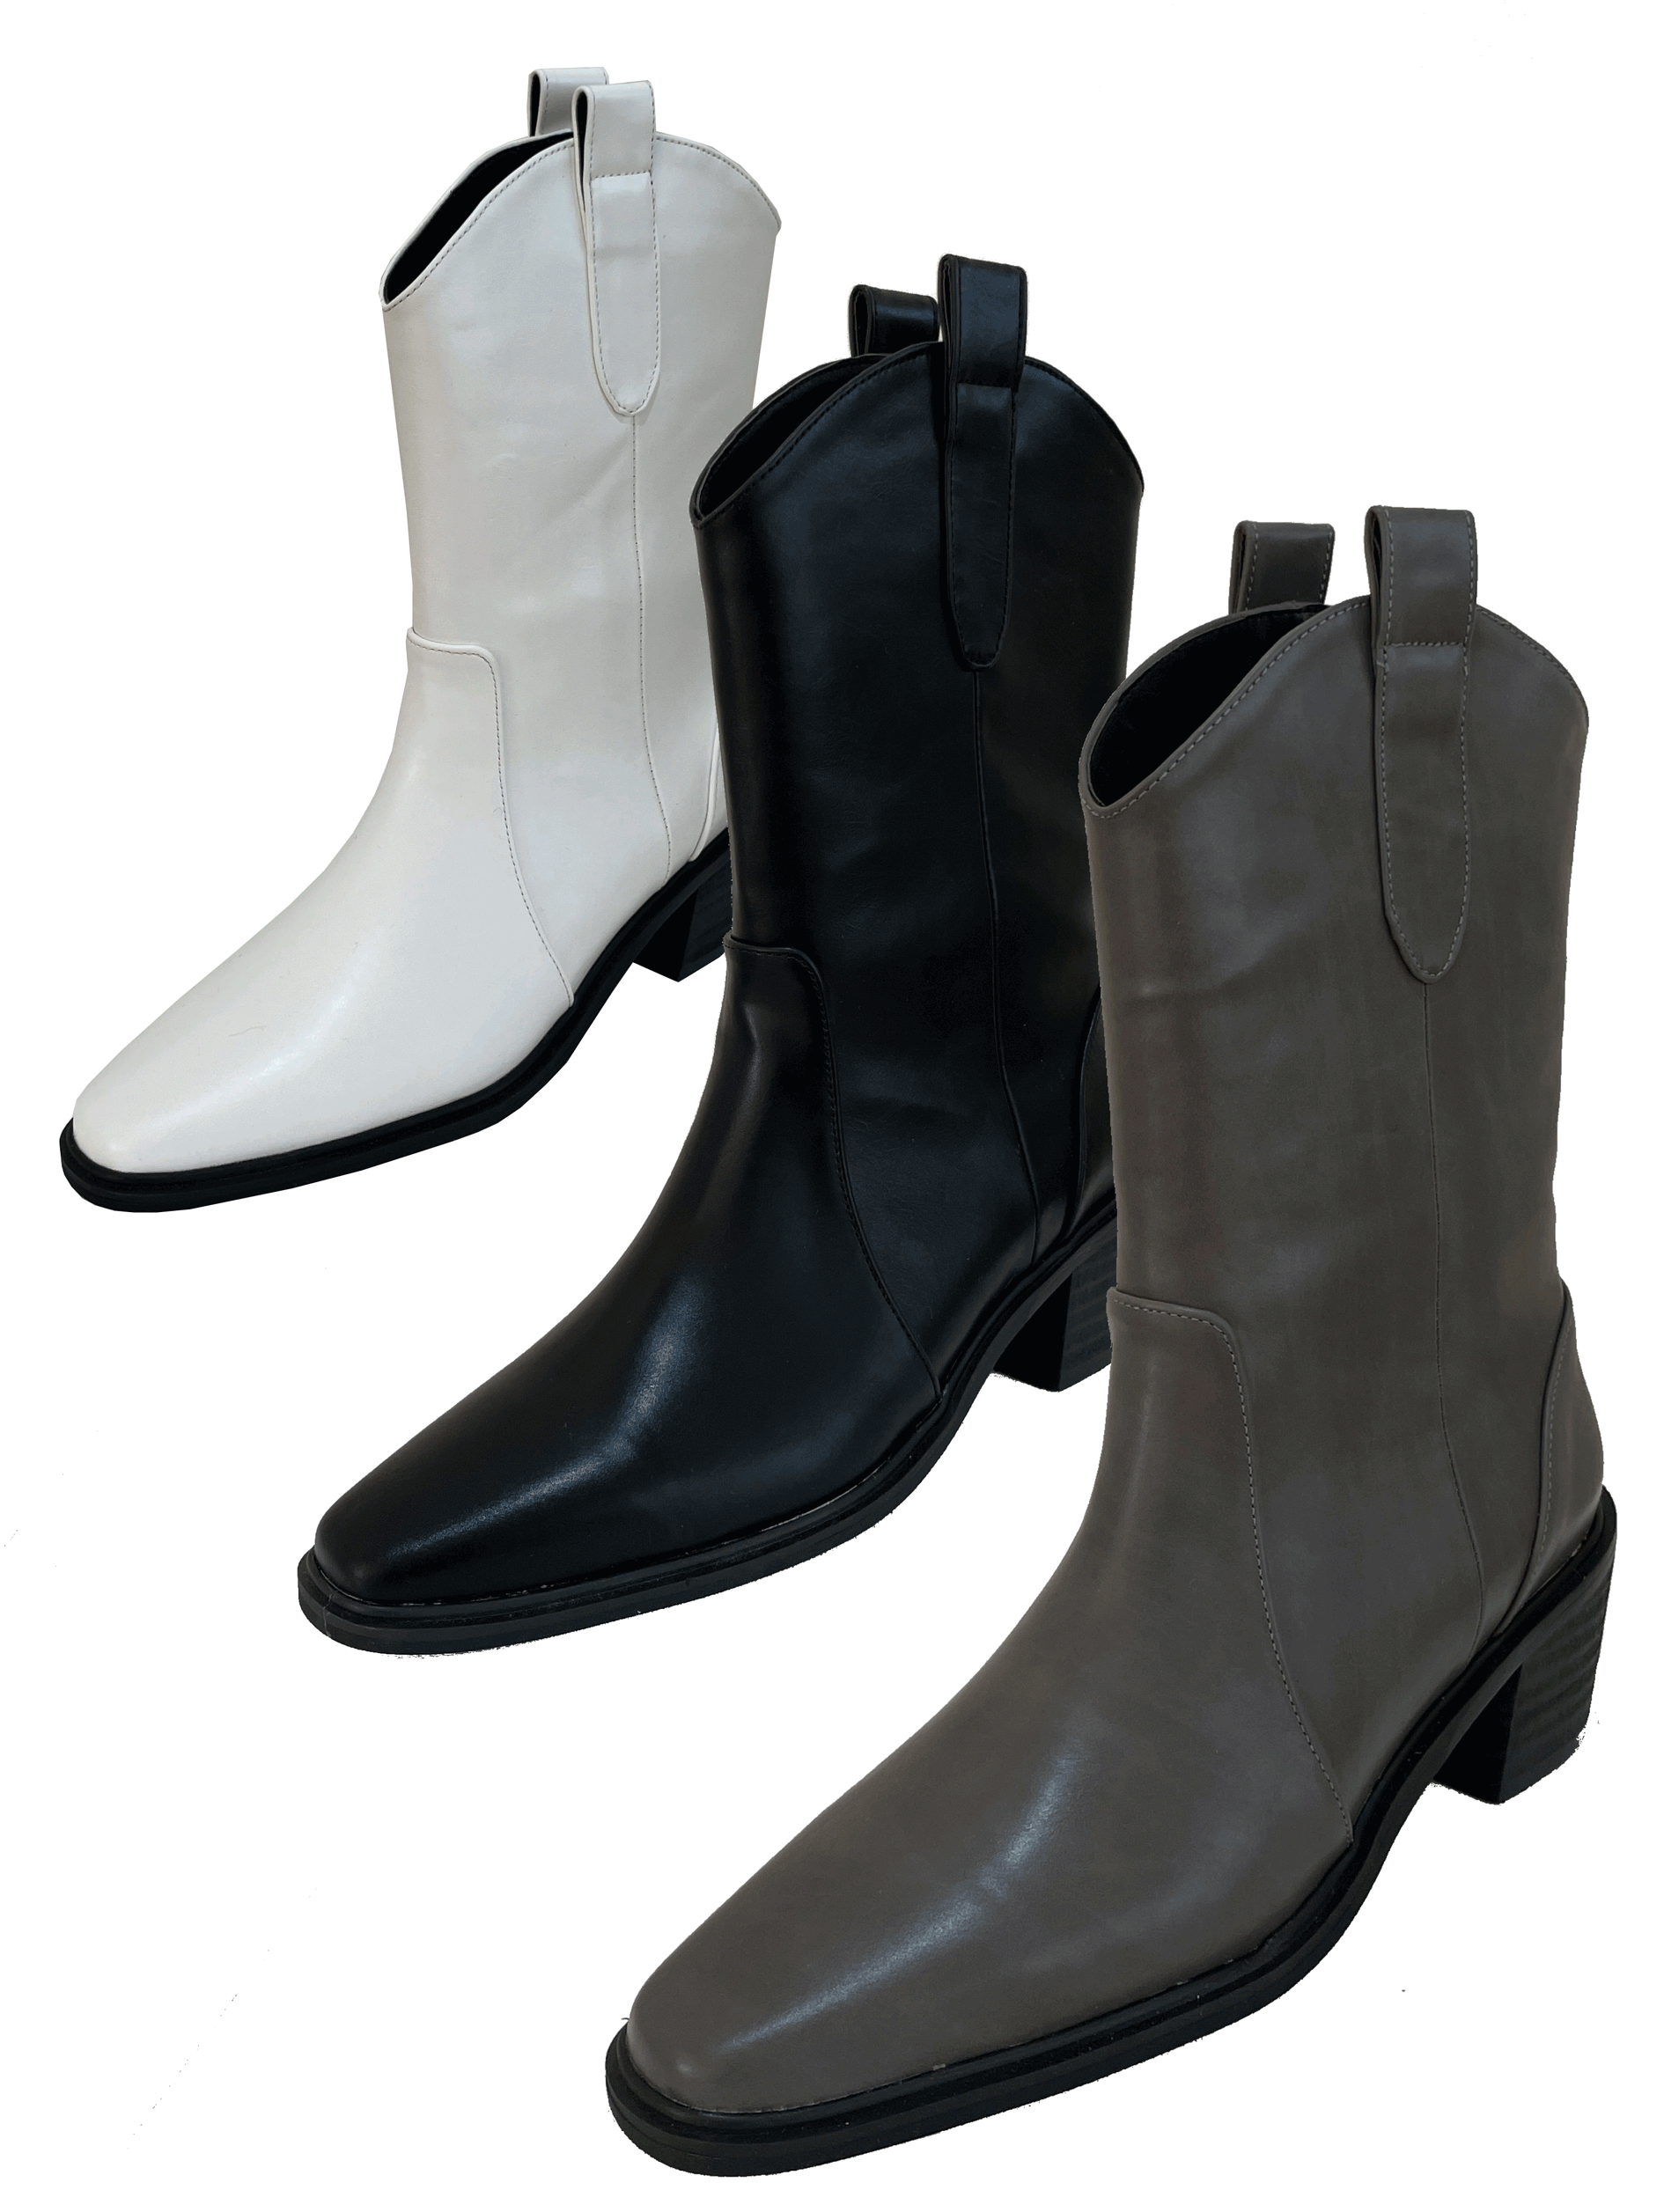 Muse middle western boots